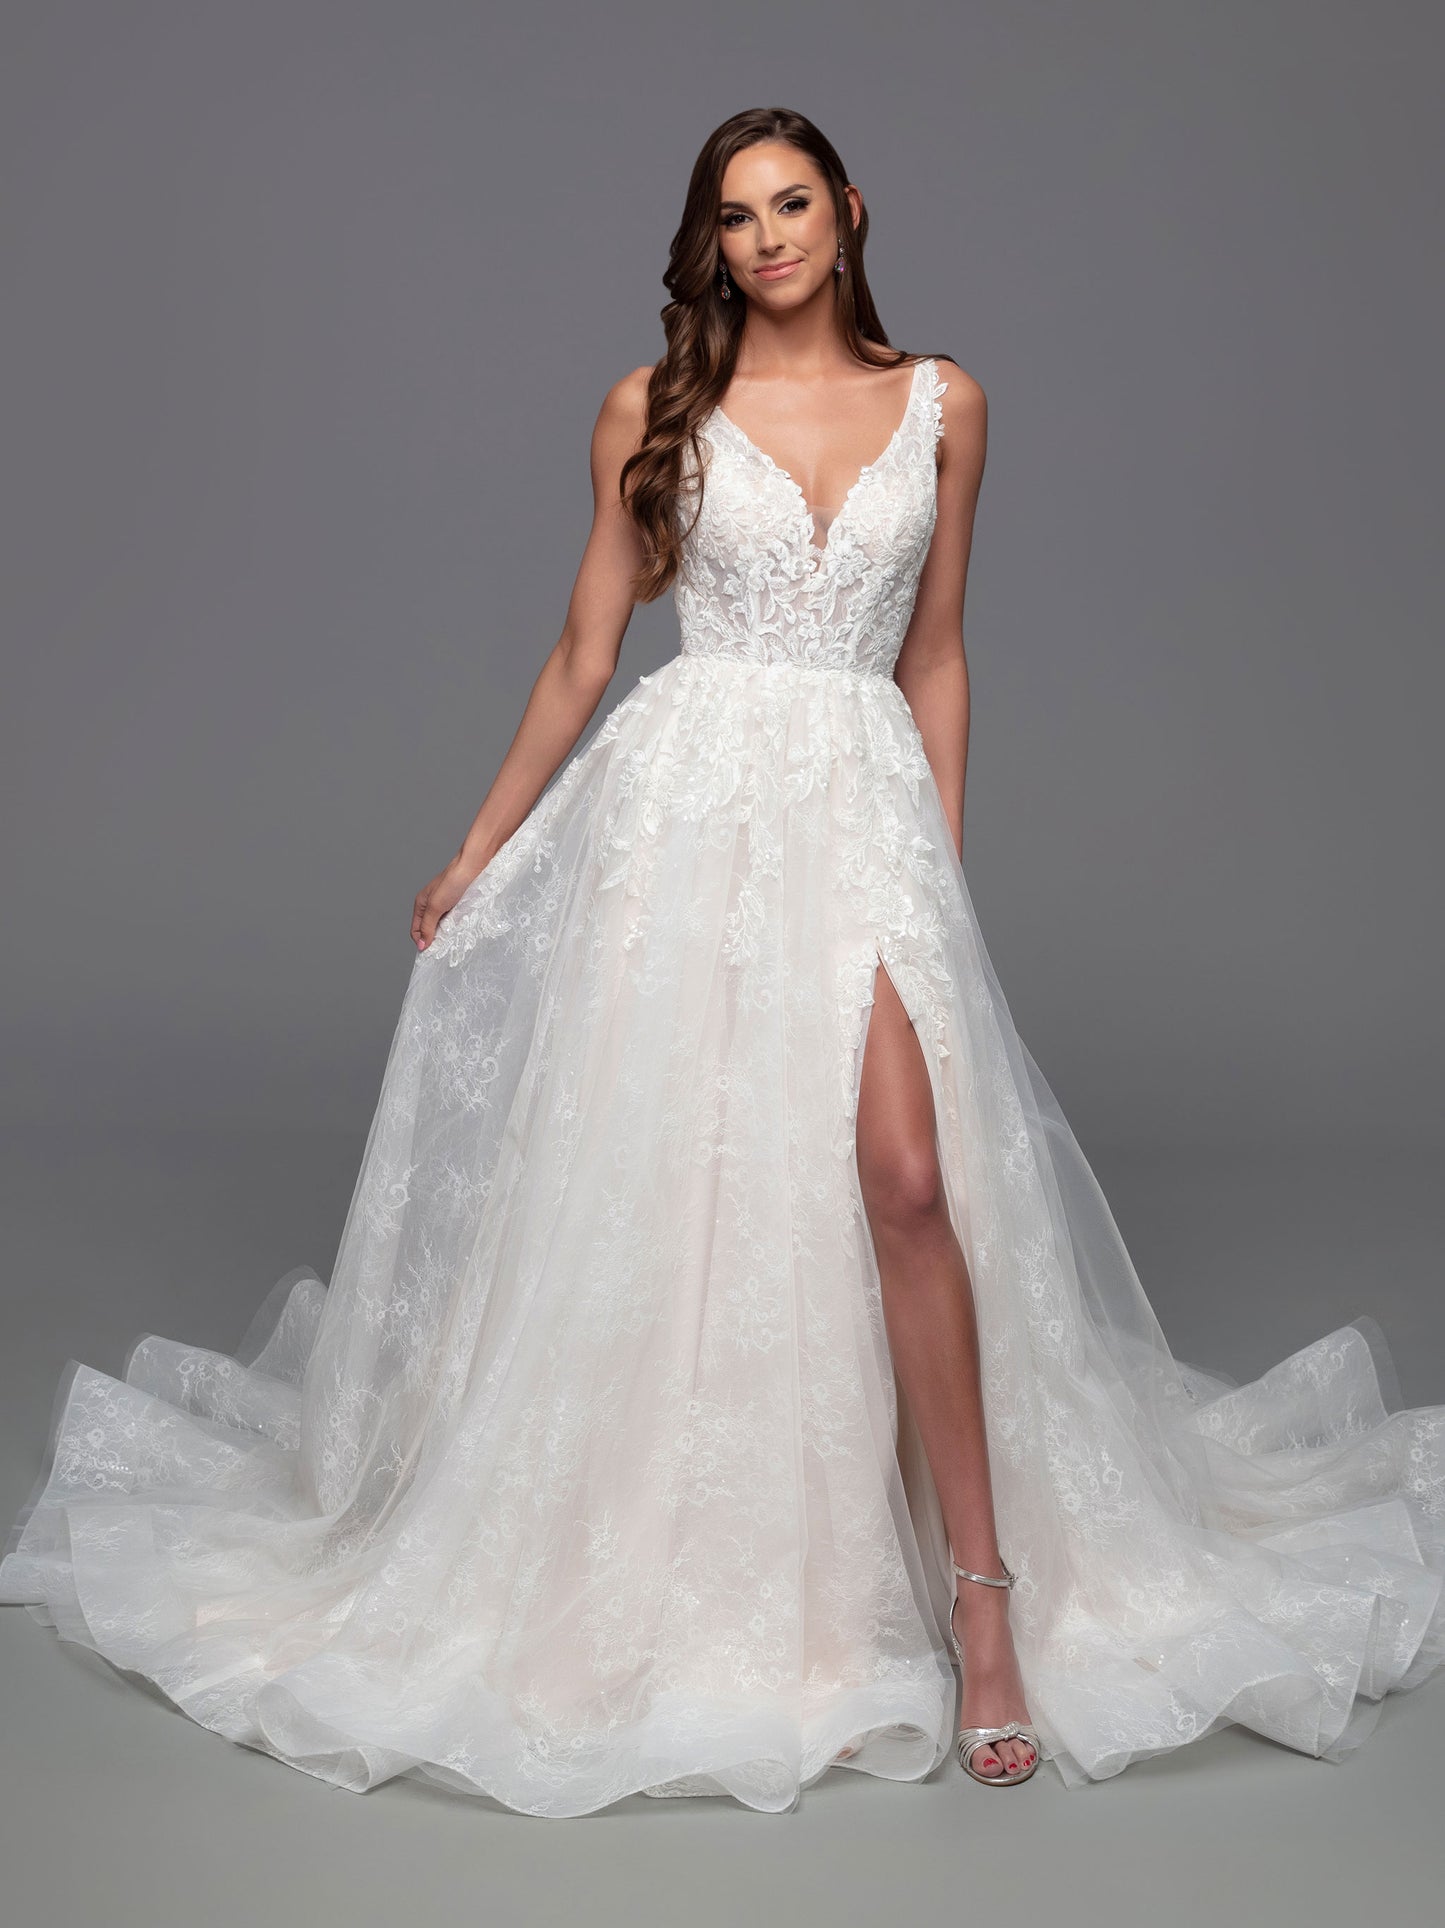 The Davinci Bridal 50821 is a stunning choice for a wedding dress, featuring a fitted V-neckline, sheer bodice, and a gorgeous a-line maxi skirt with a chapel length train and delicate sequin detailing. The daring slit skirt adds a daring touch for a timeless yet modern look.  Sizes: 2-20  Colors: Ivory/Ivory, Ivory/Light Blush